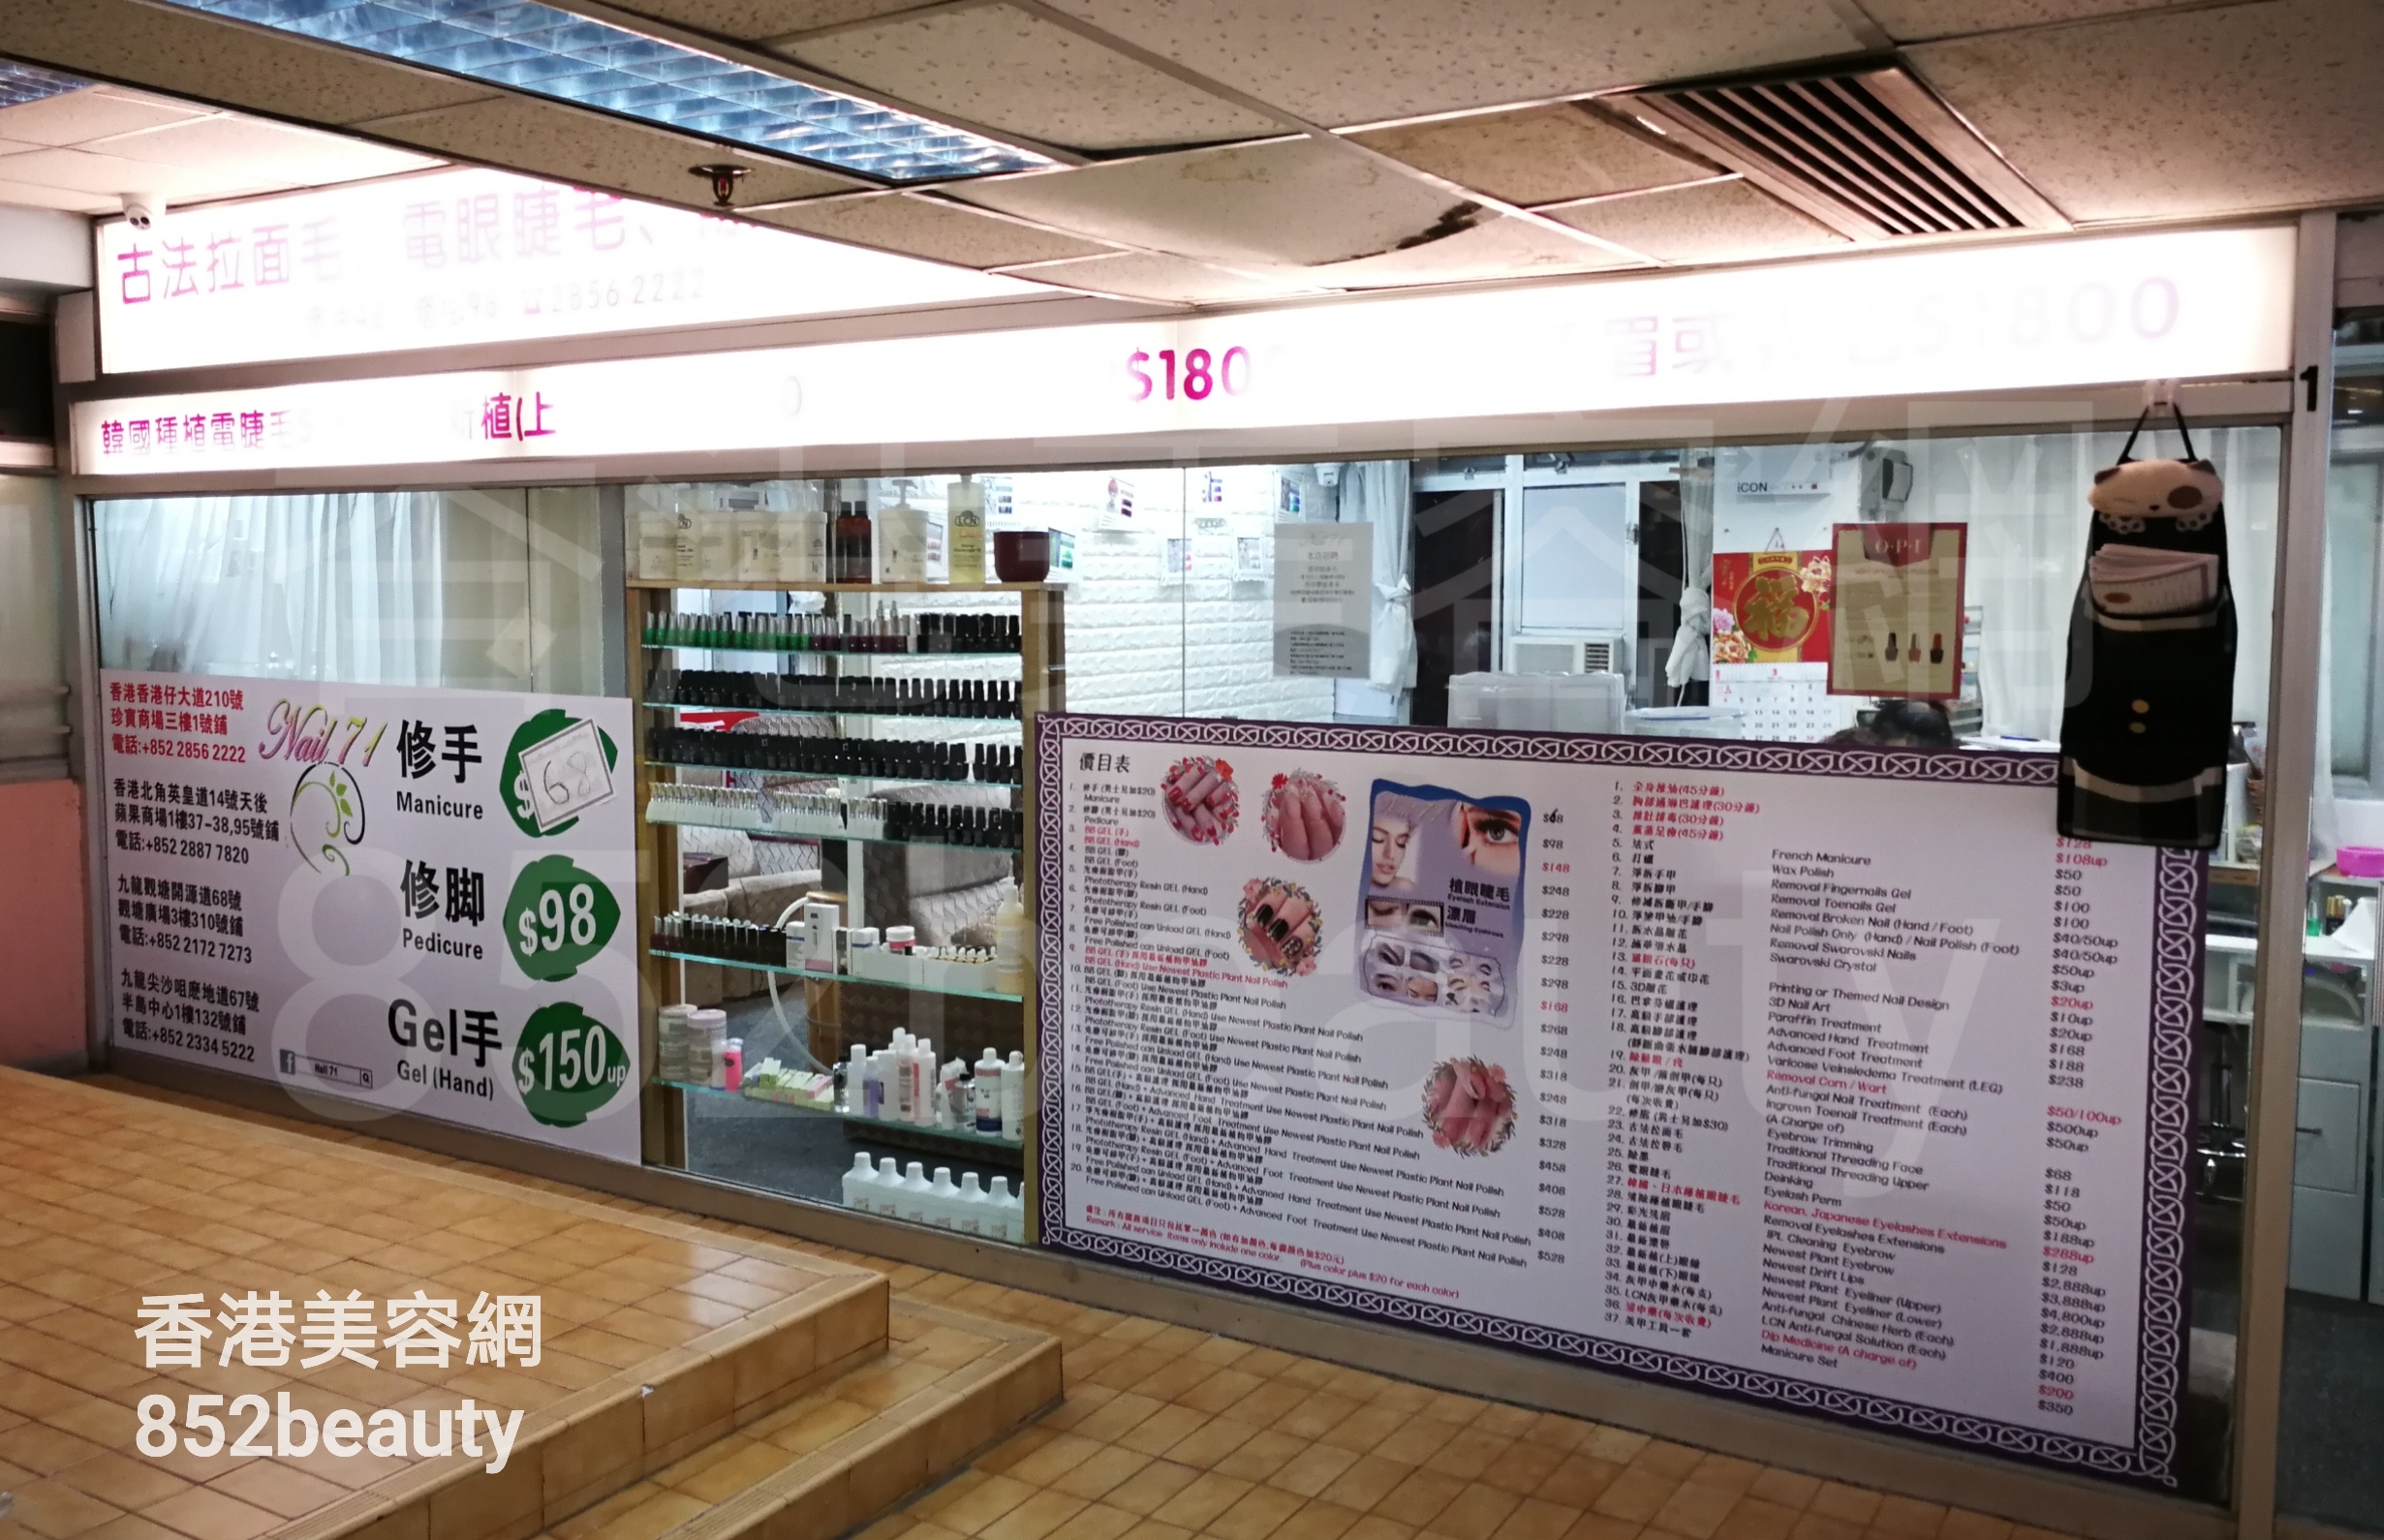 Hand and foot care: Nail 71 (香港仔店)